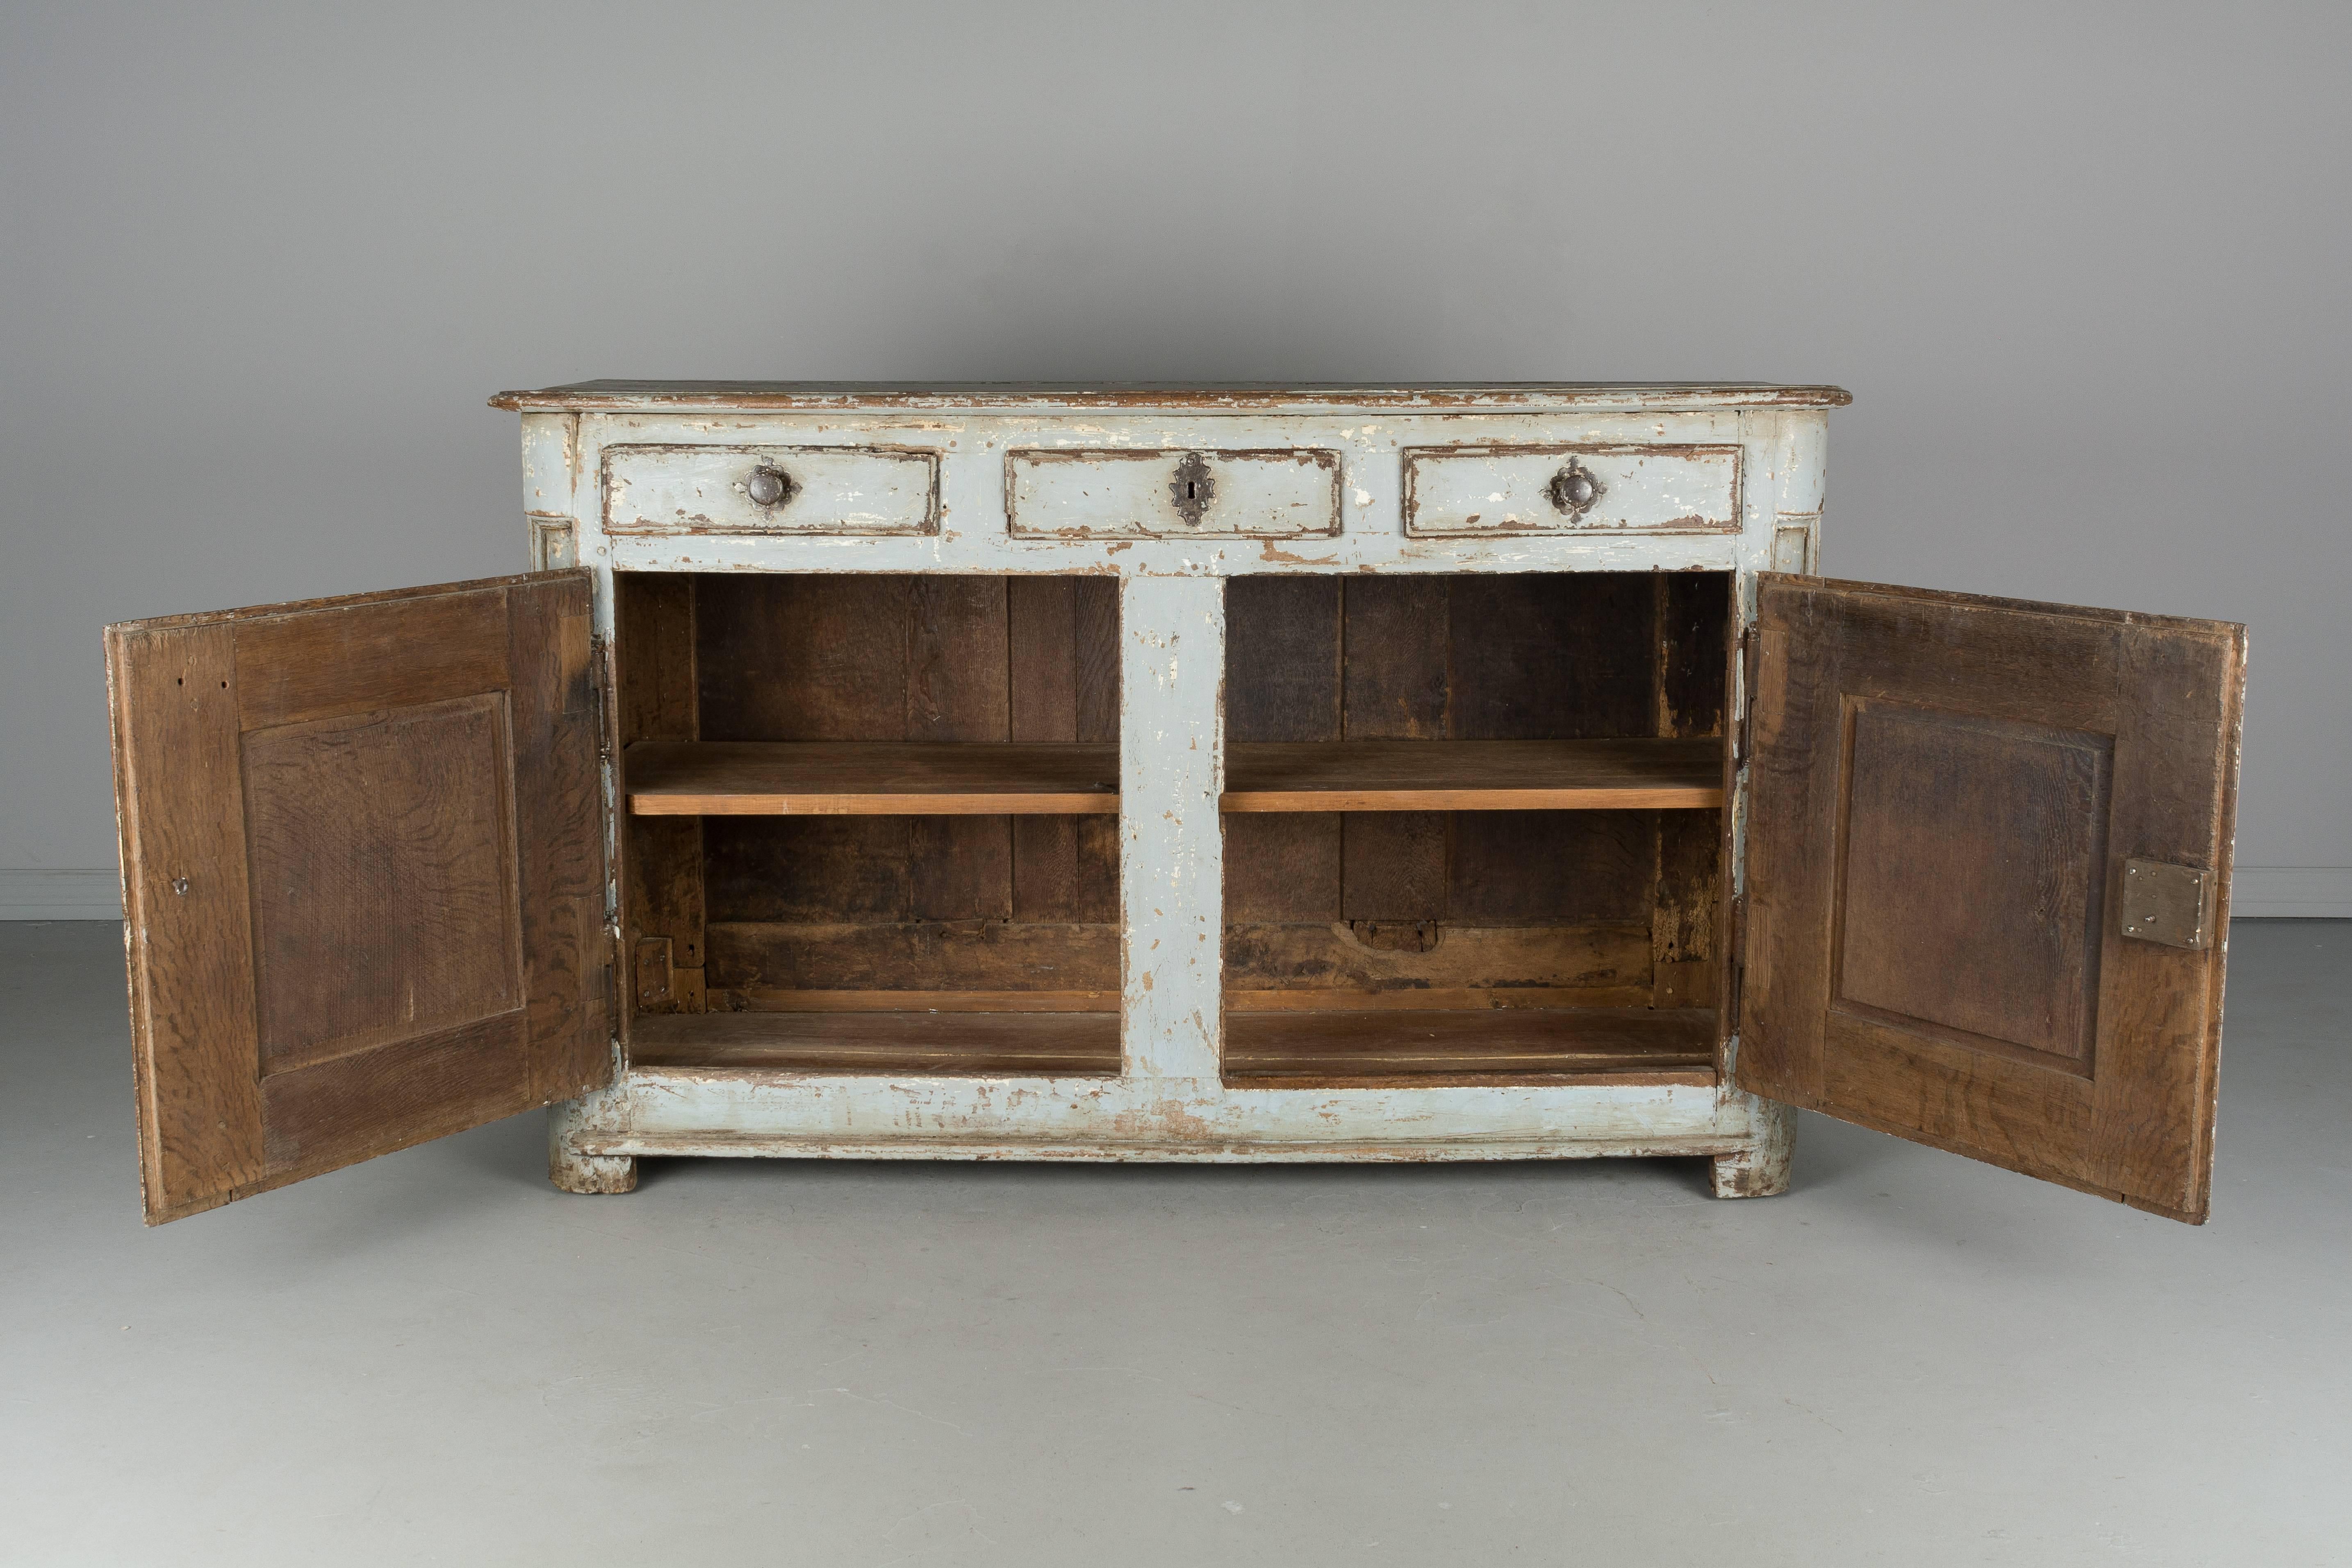 18th century sideboard